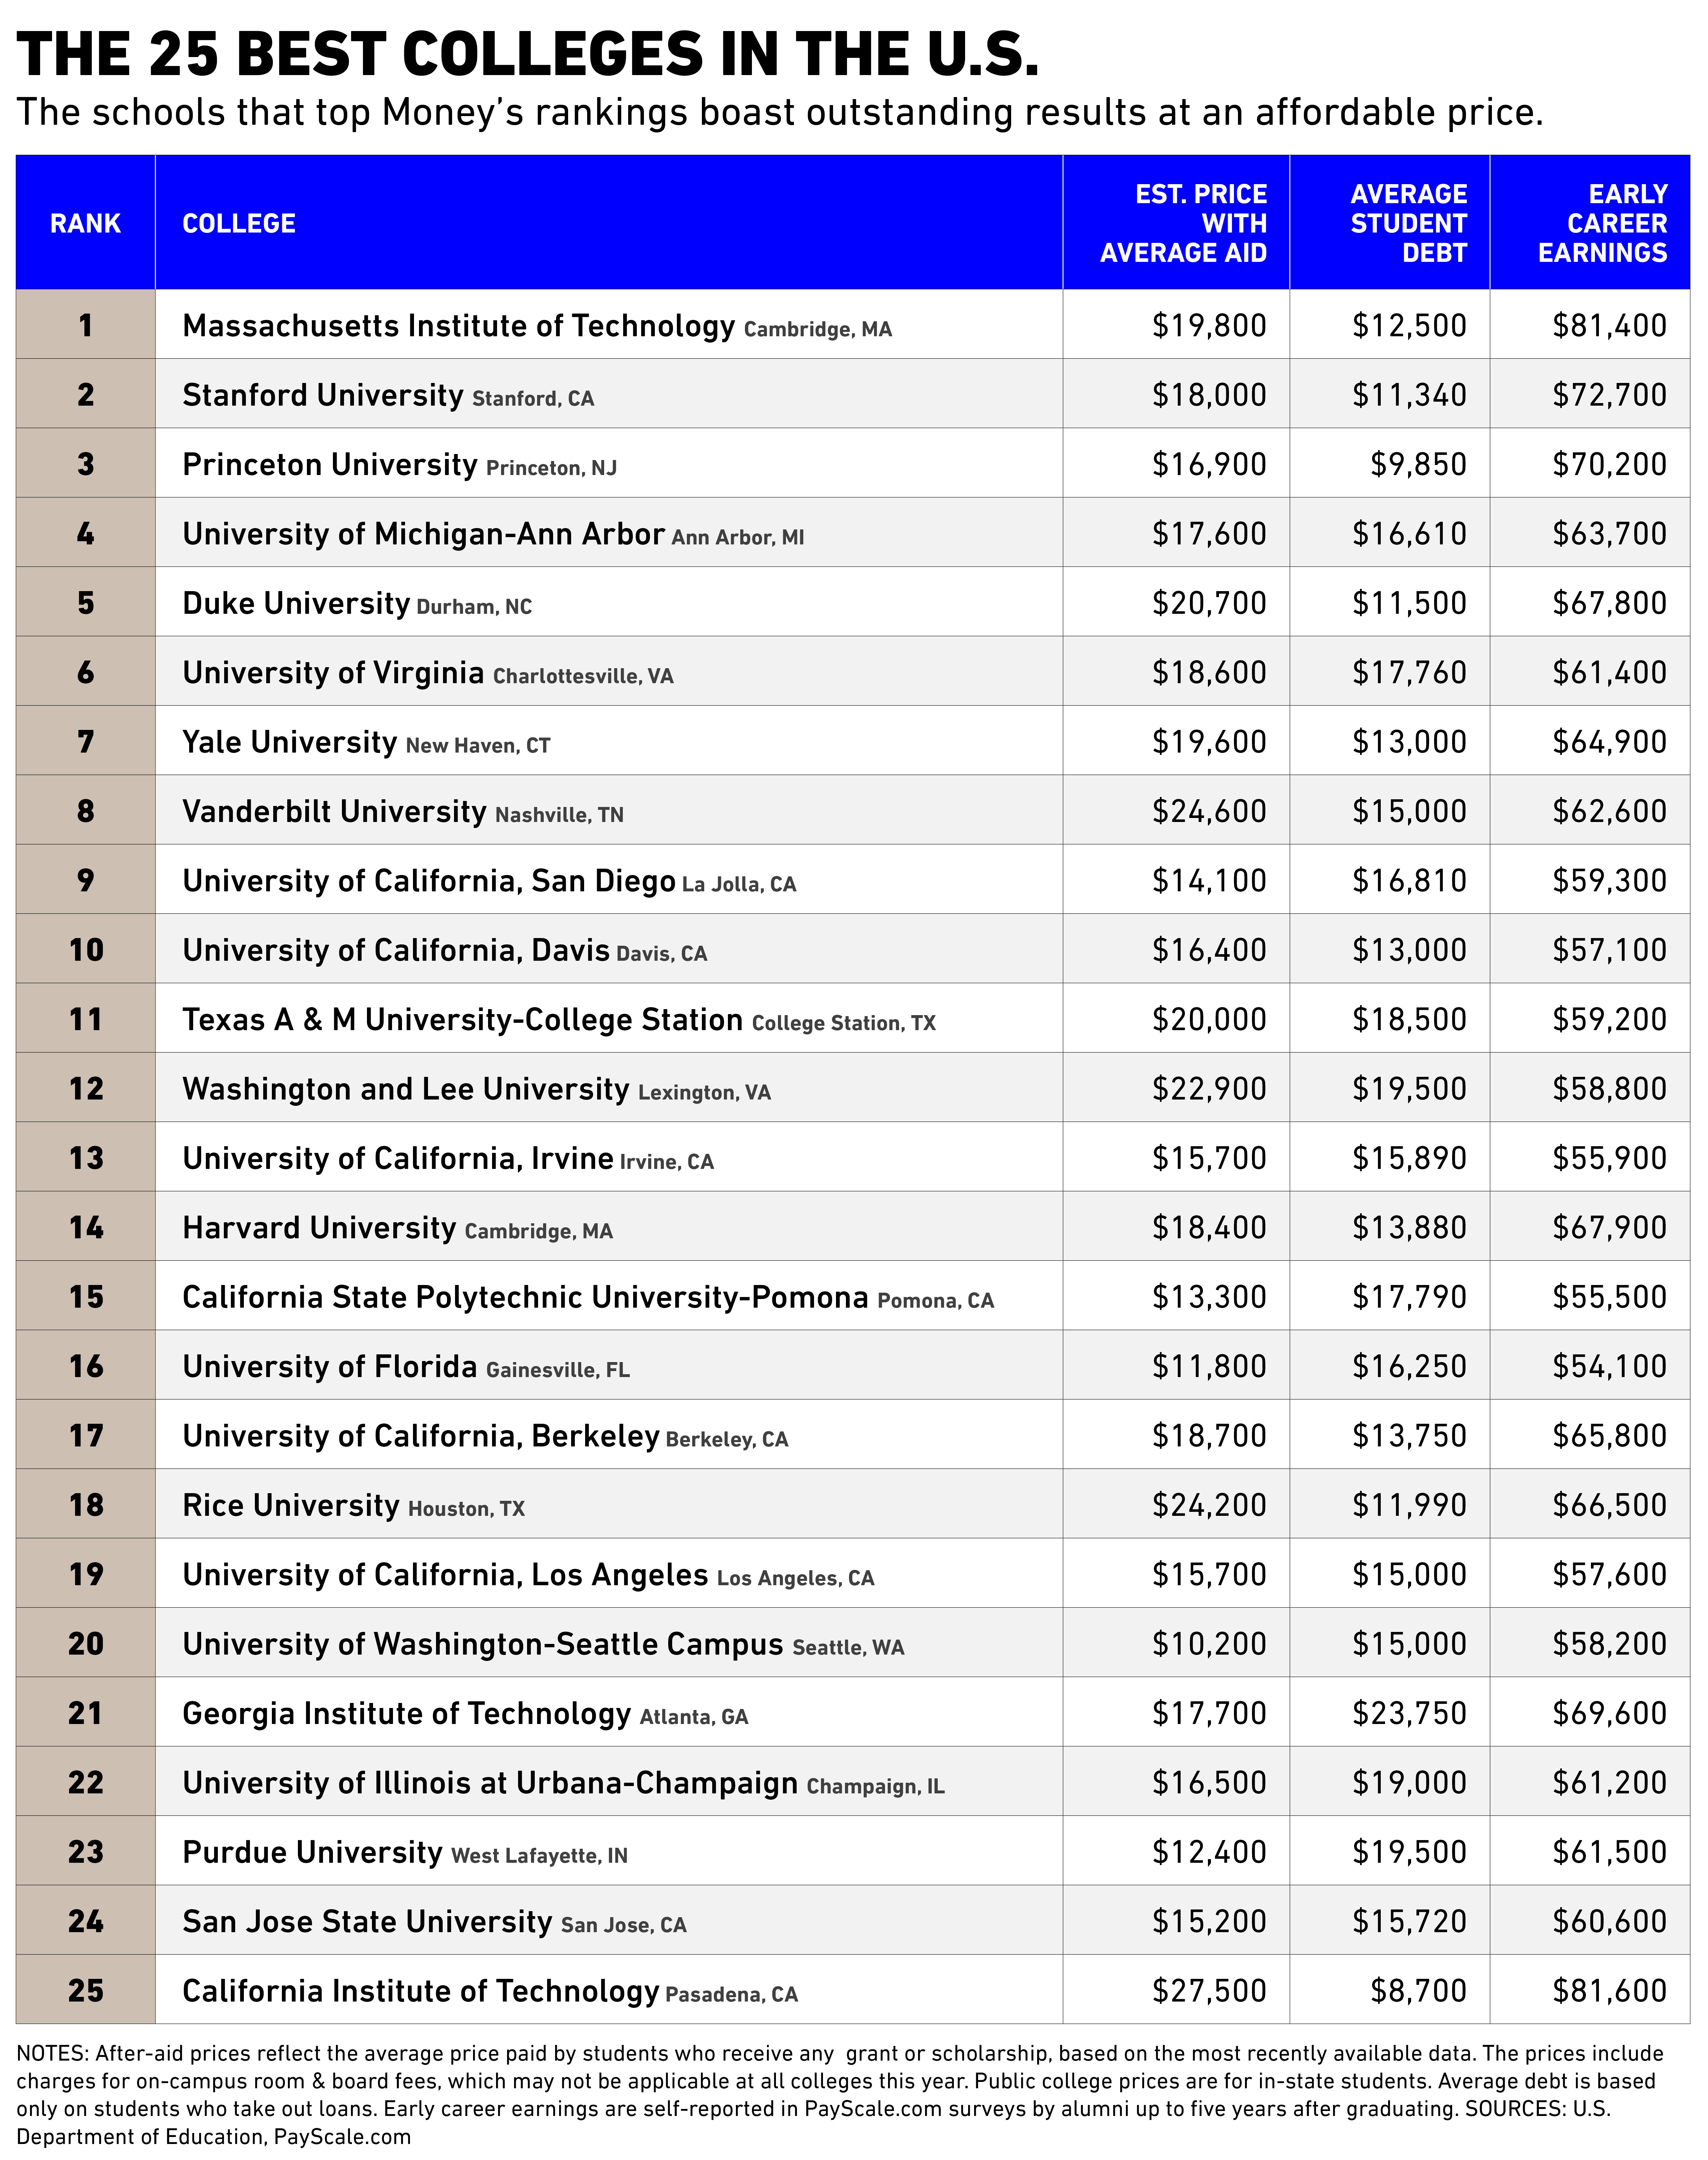 The 25 Best Colleges in America Right Now